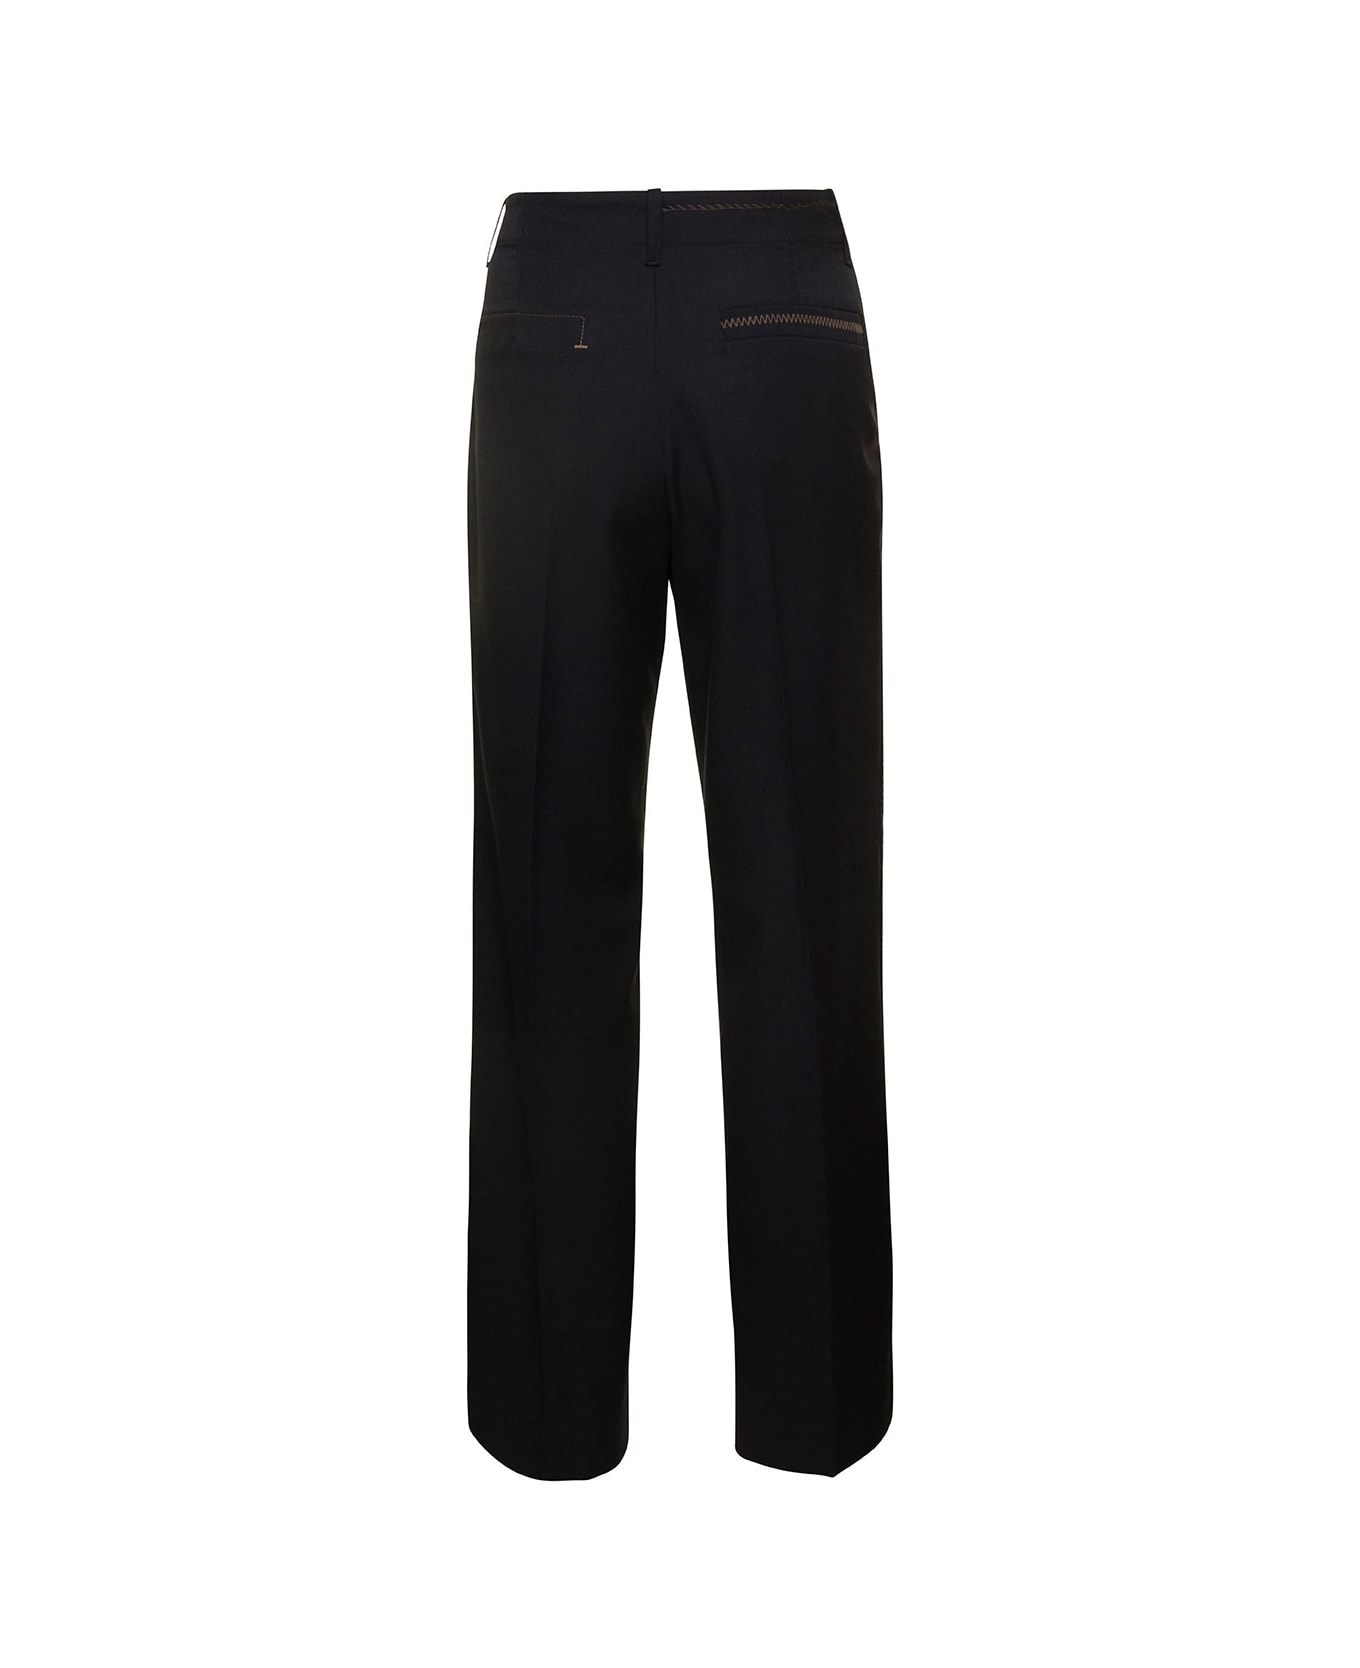 Jacquemus 'le Pantalon Cordao' Black Pants With Pressed Pleats In Wool Woman - Black